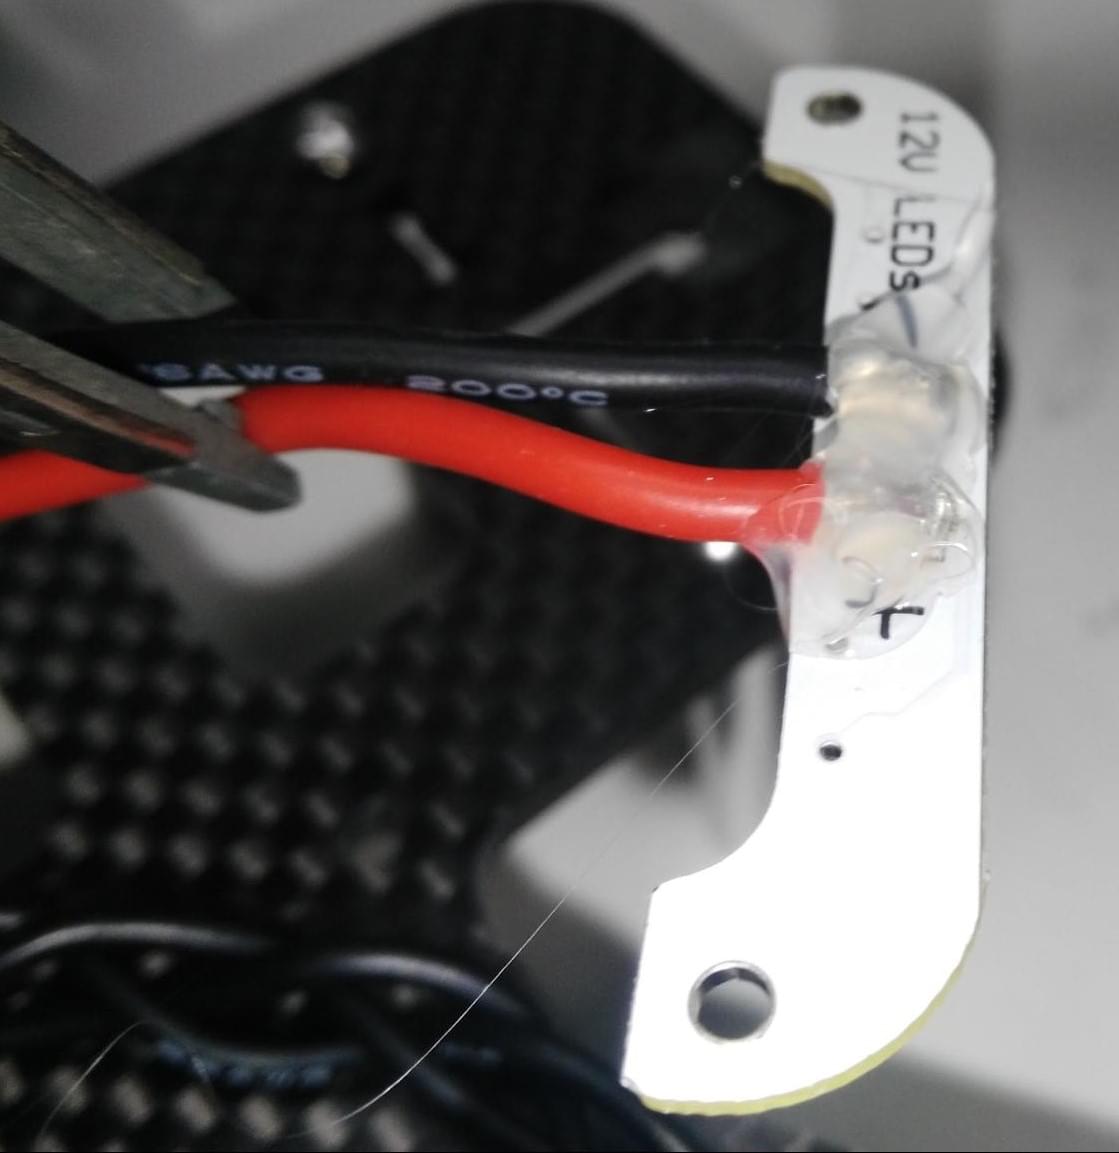 Use silicon to isolate LEDs from frame